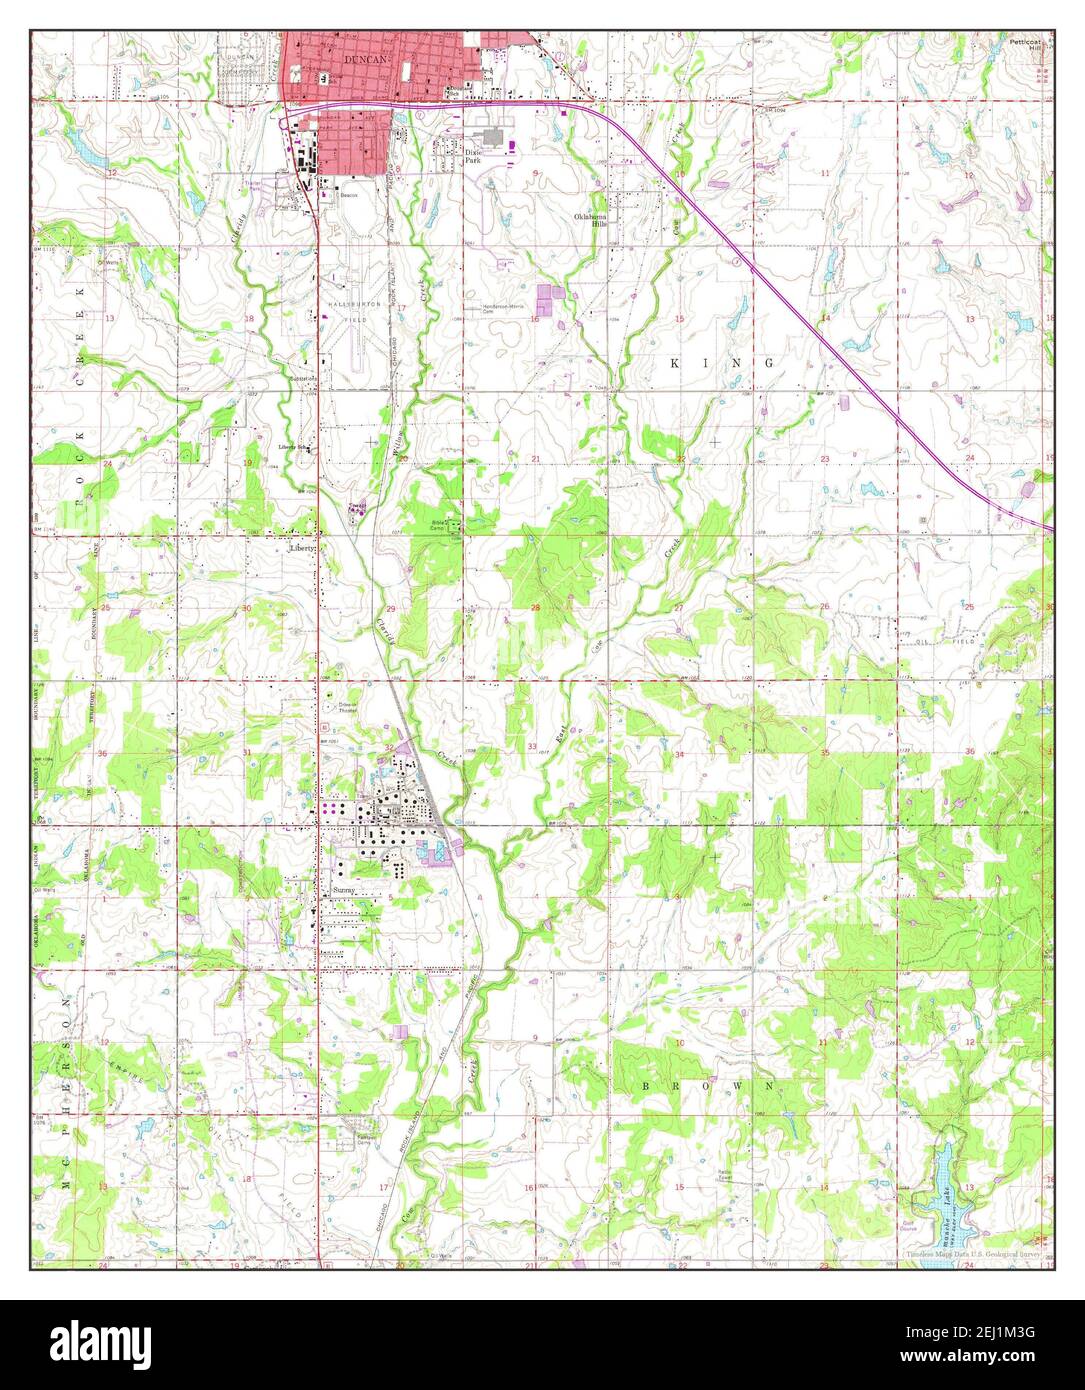 Duncan South, Oklahoma, map 1964, 1:24000, United States of America by Timeless Maps, data U.S. Geological Survey Stock Photo